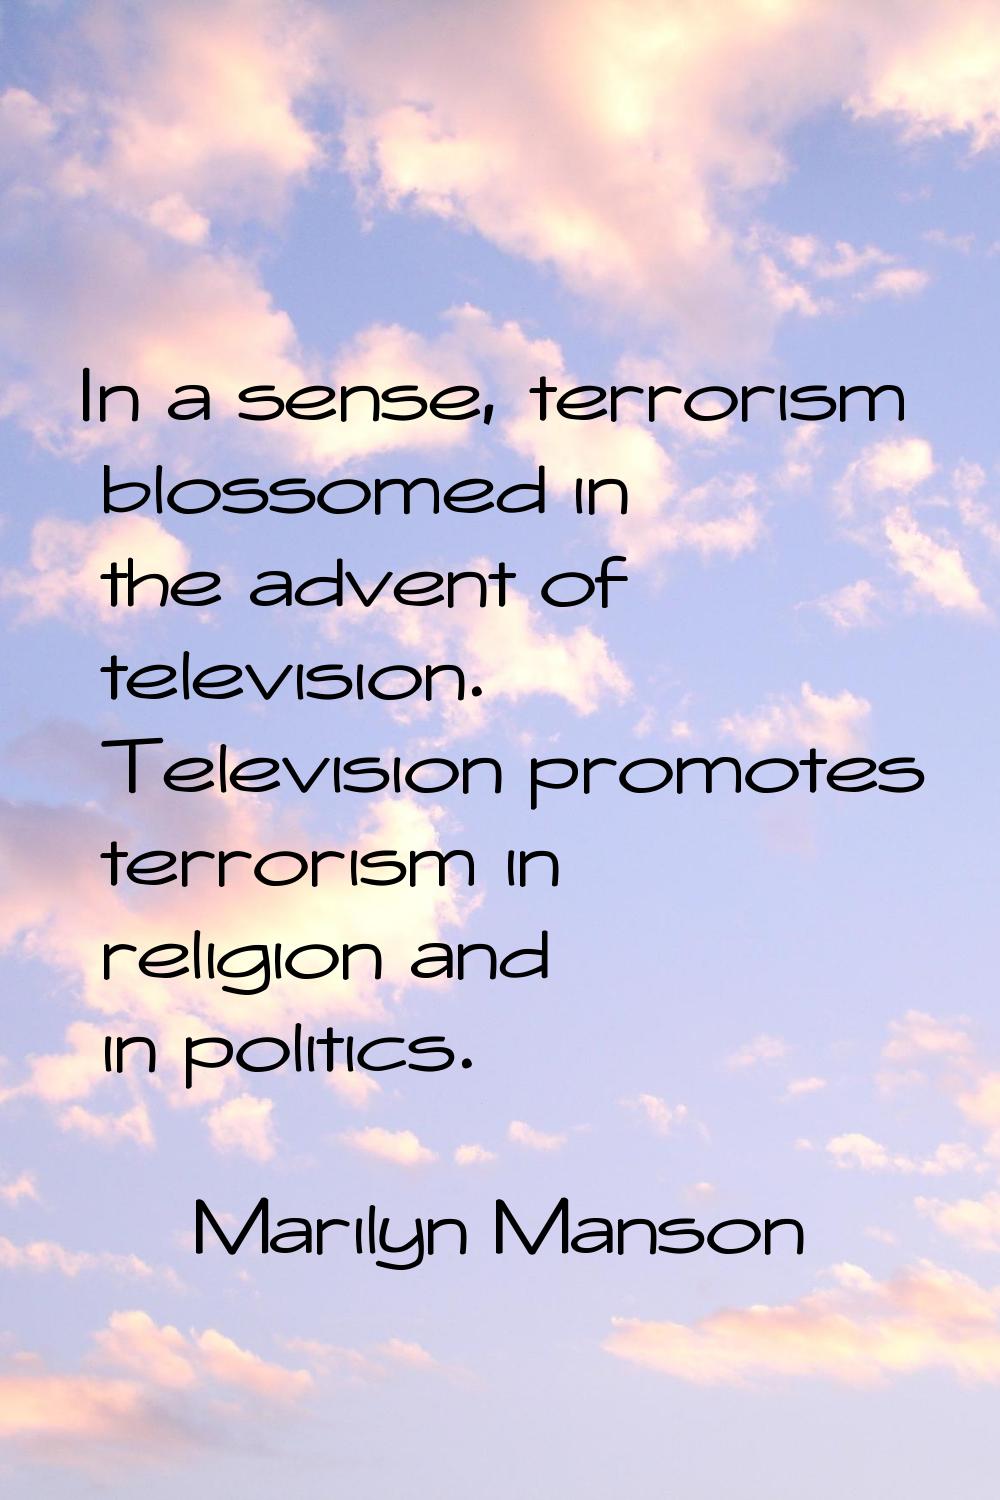 In a sense, terrorism blossomed in the advent of television. Television promotes terrorism in relig